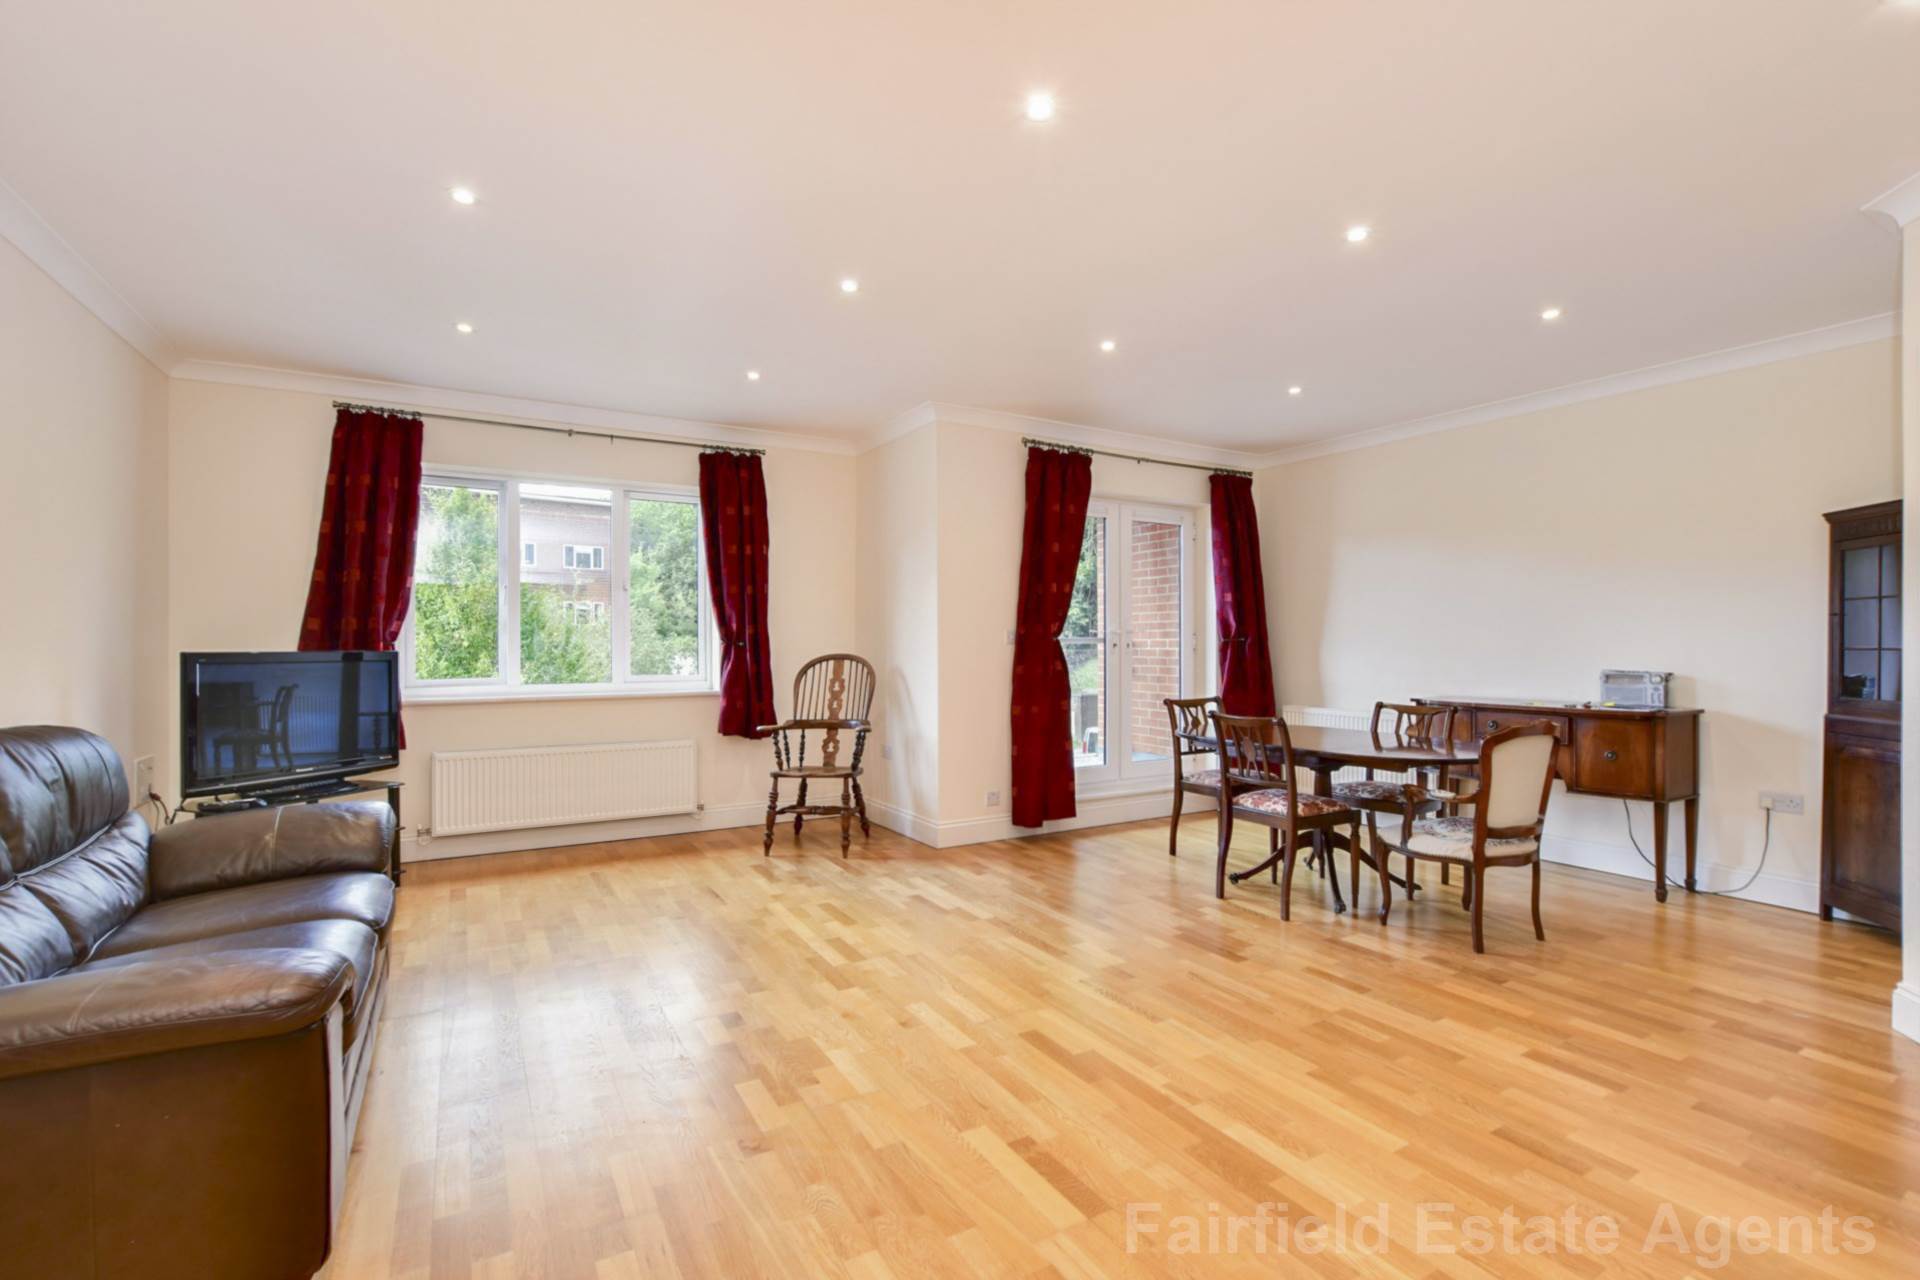 2 bed Flat for rent in Chorleywood. From Fairfield Estate Agents - Watford Branch